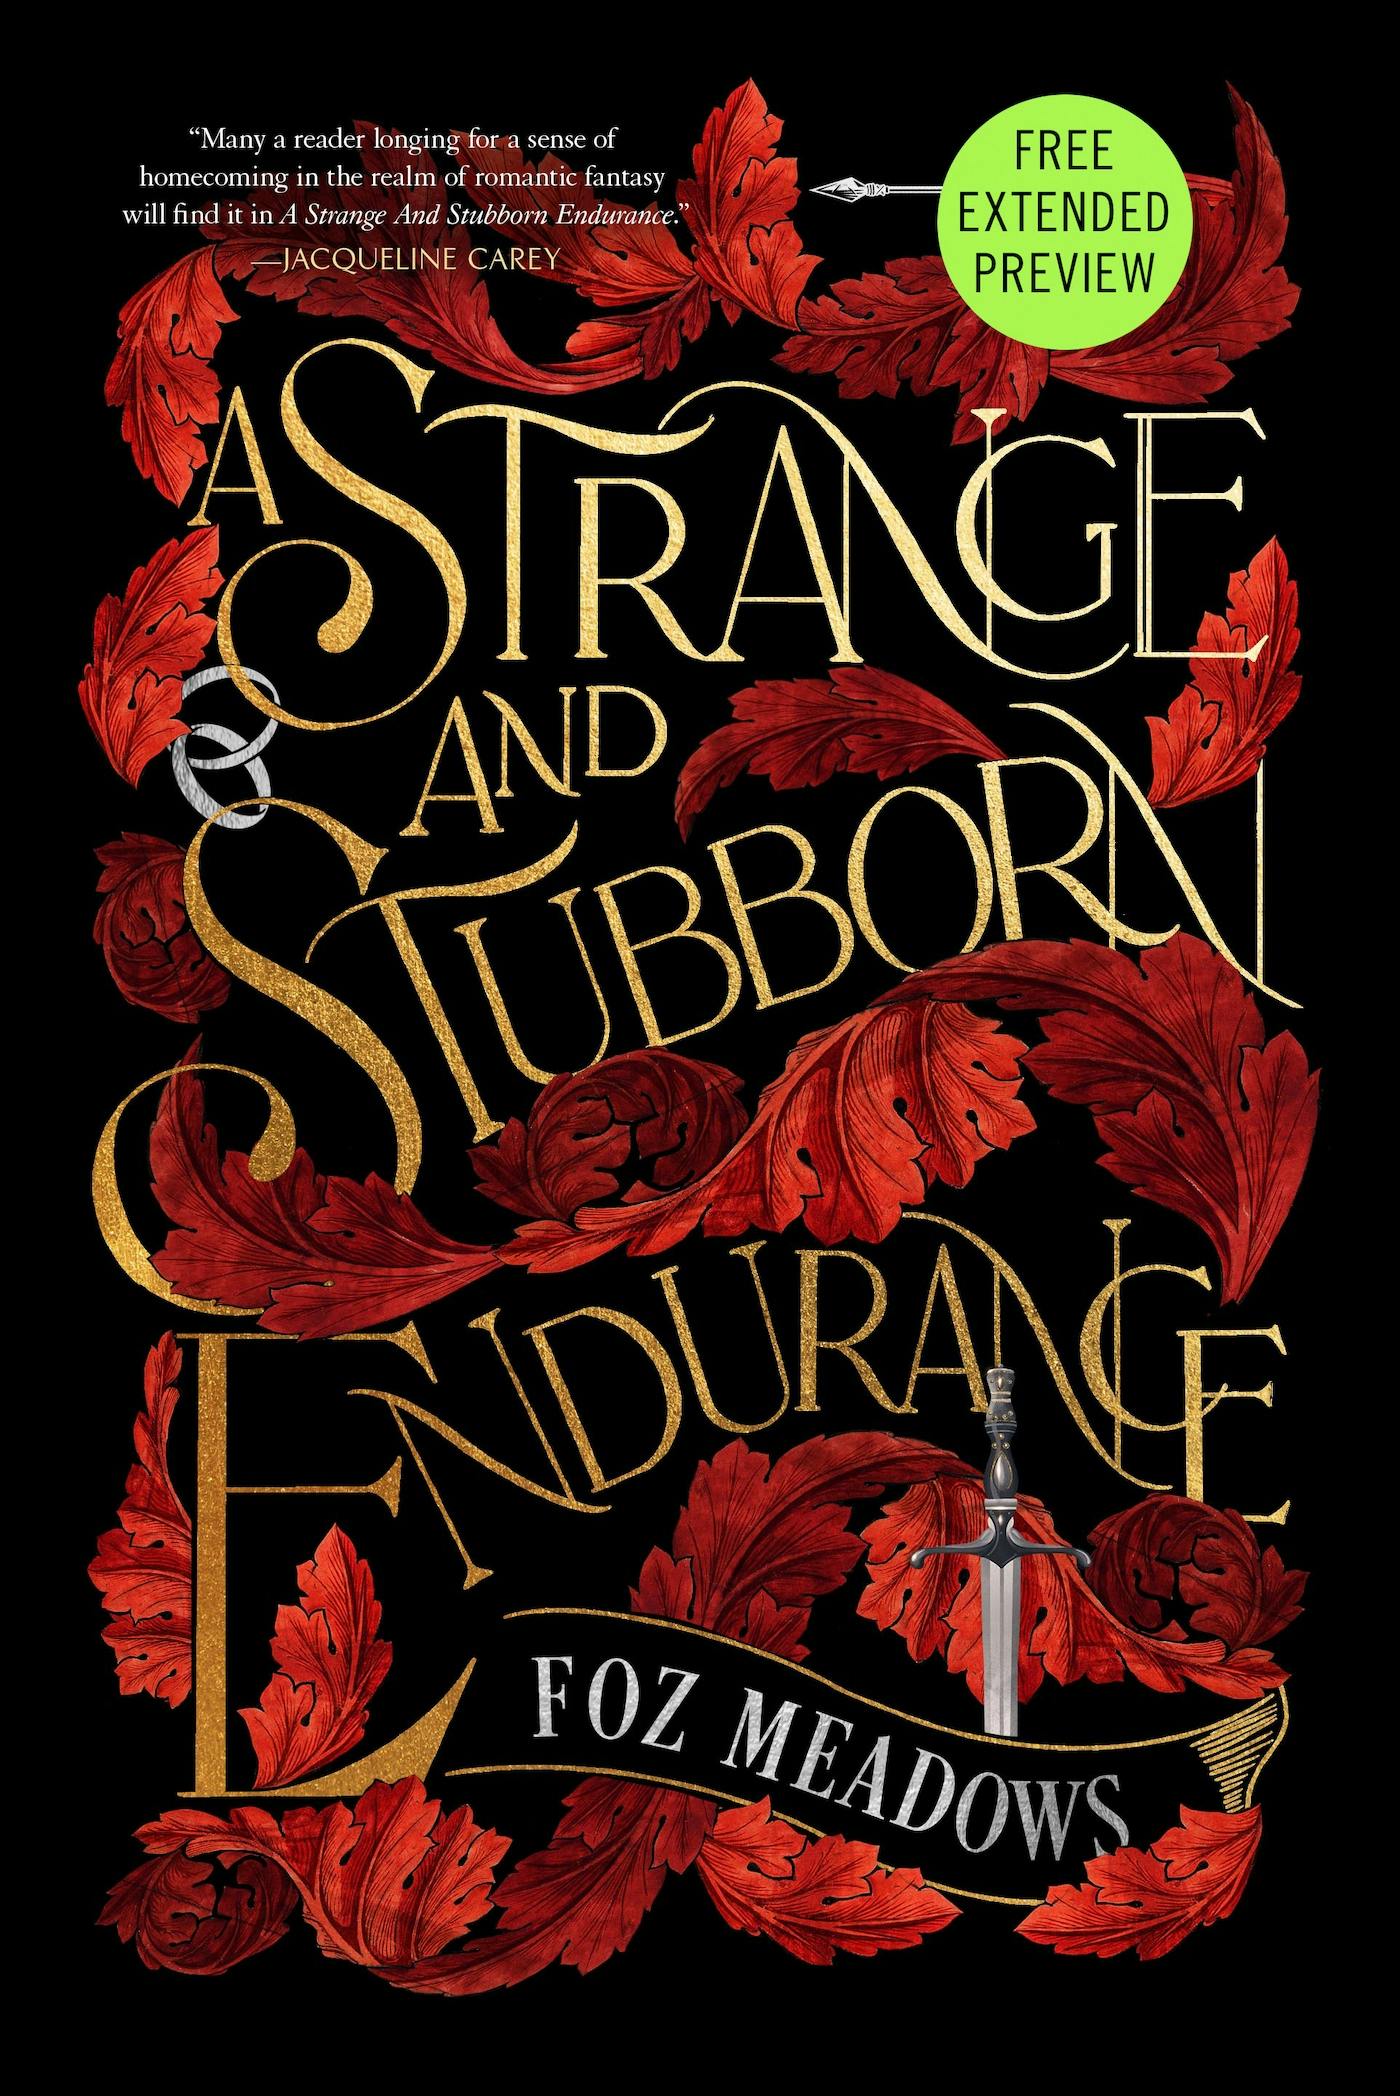 Cover for the book titled as: A Strange and Stubborn Endurance Sneak Peek